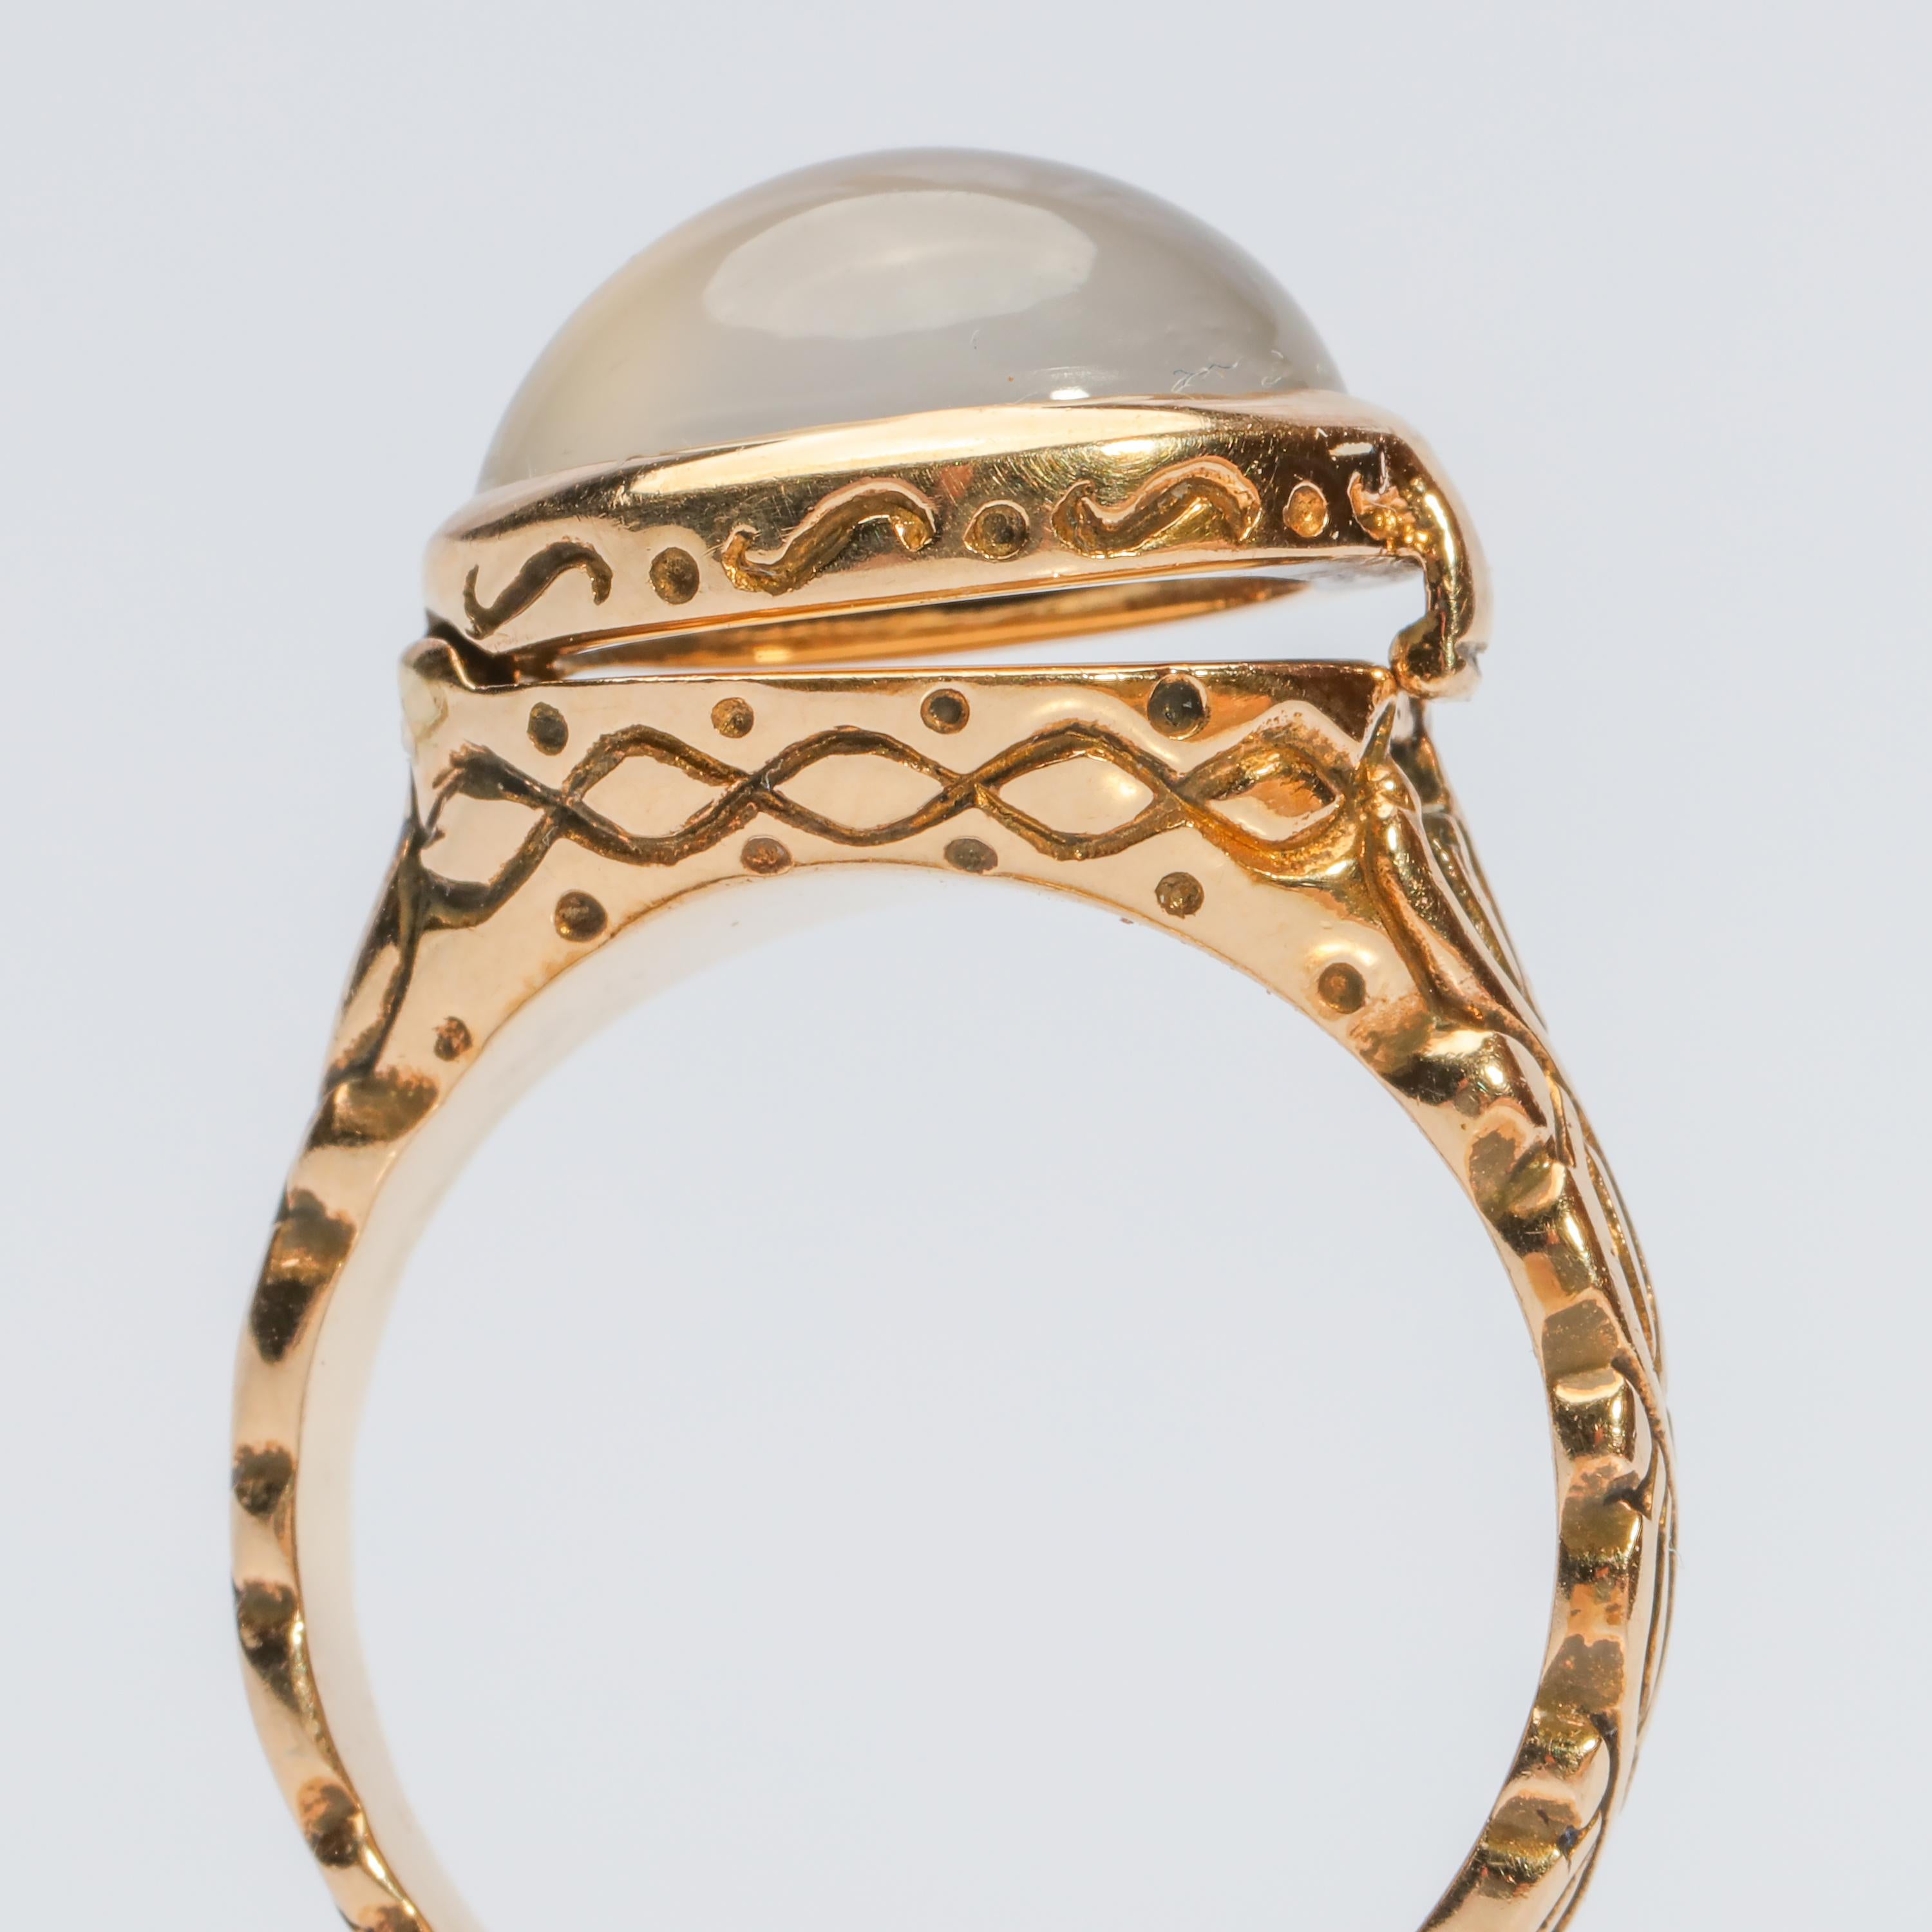 Women's or Men's Moonstone Poison Ring with Spectacular Twist